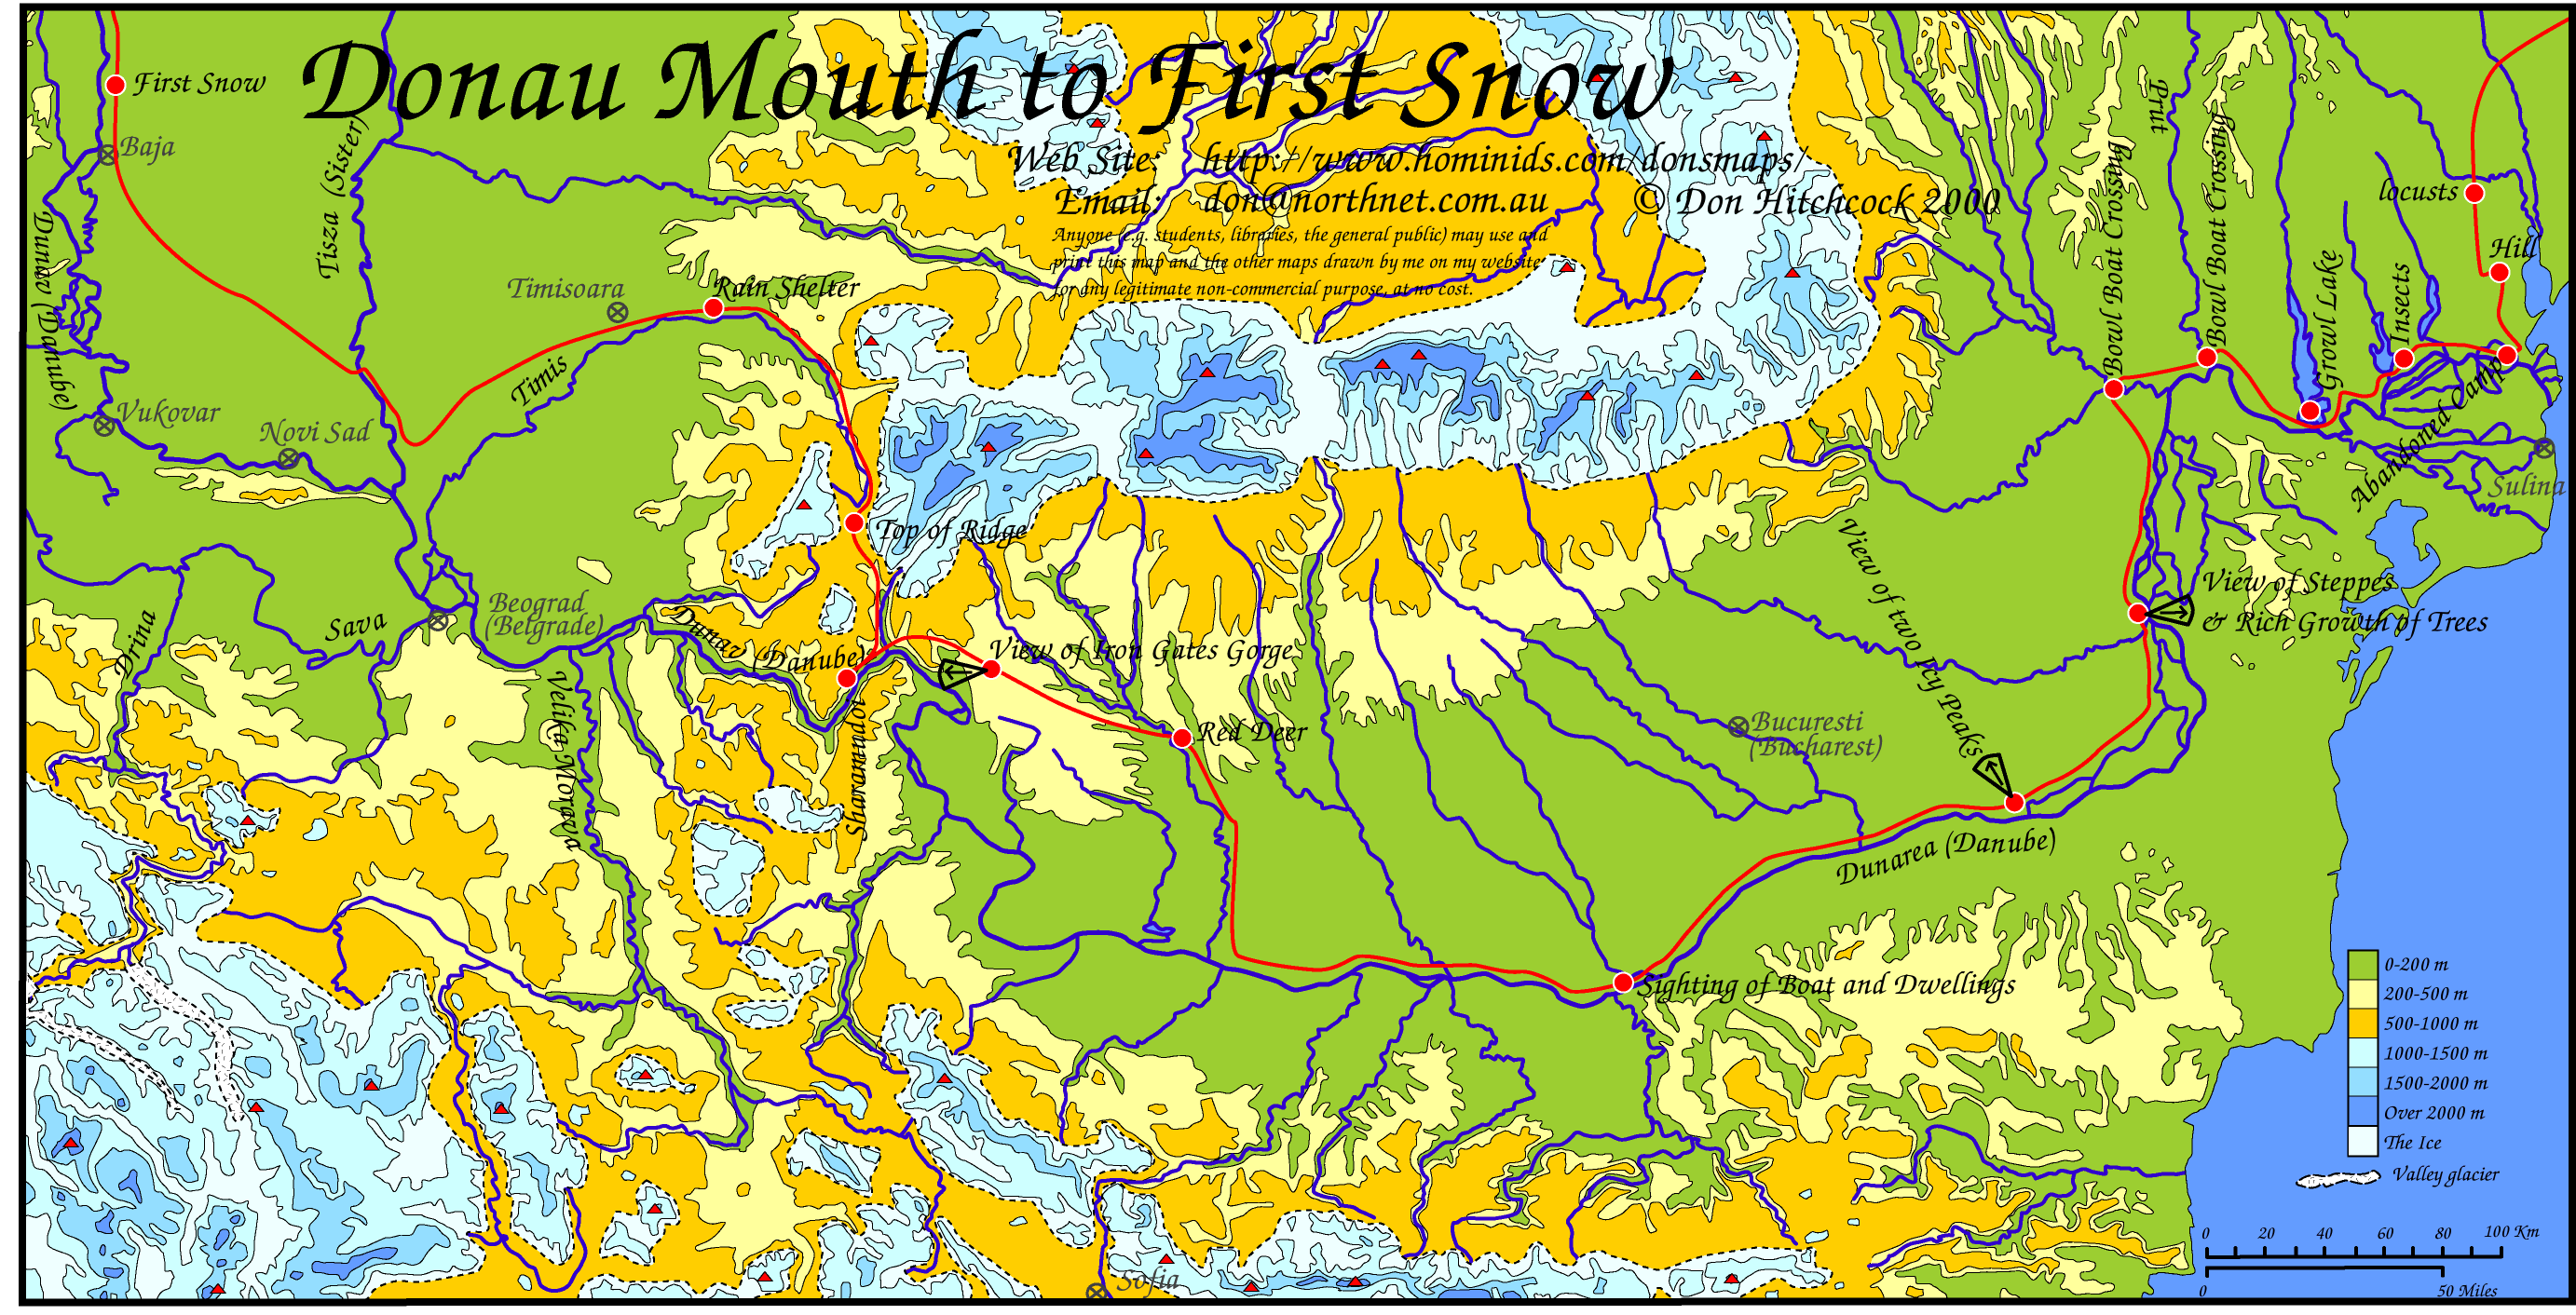 Map of The Plains of Passage Journey from the Donau mouth to First Snow